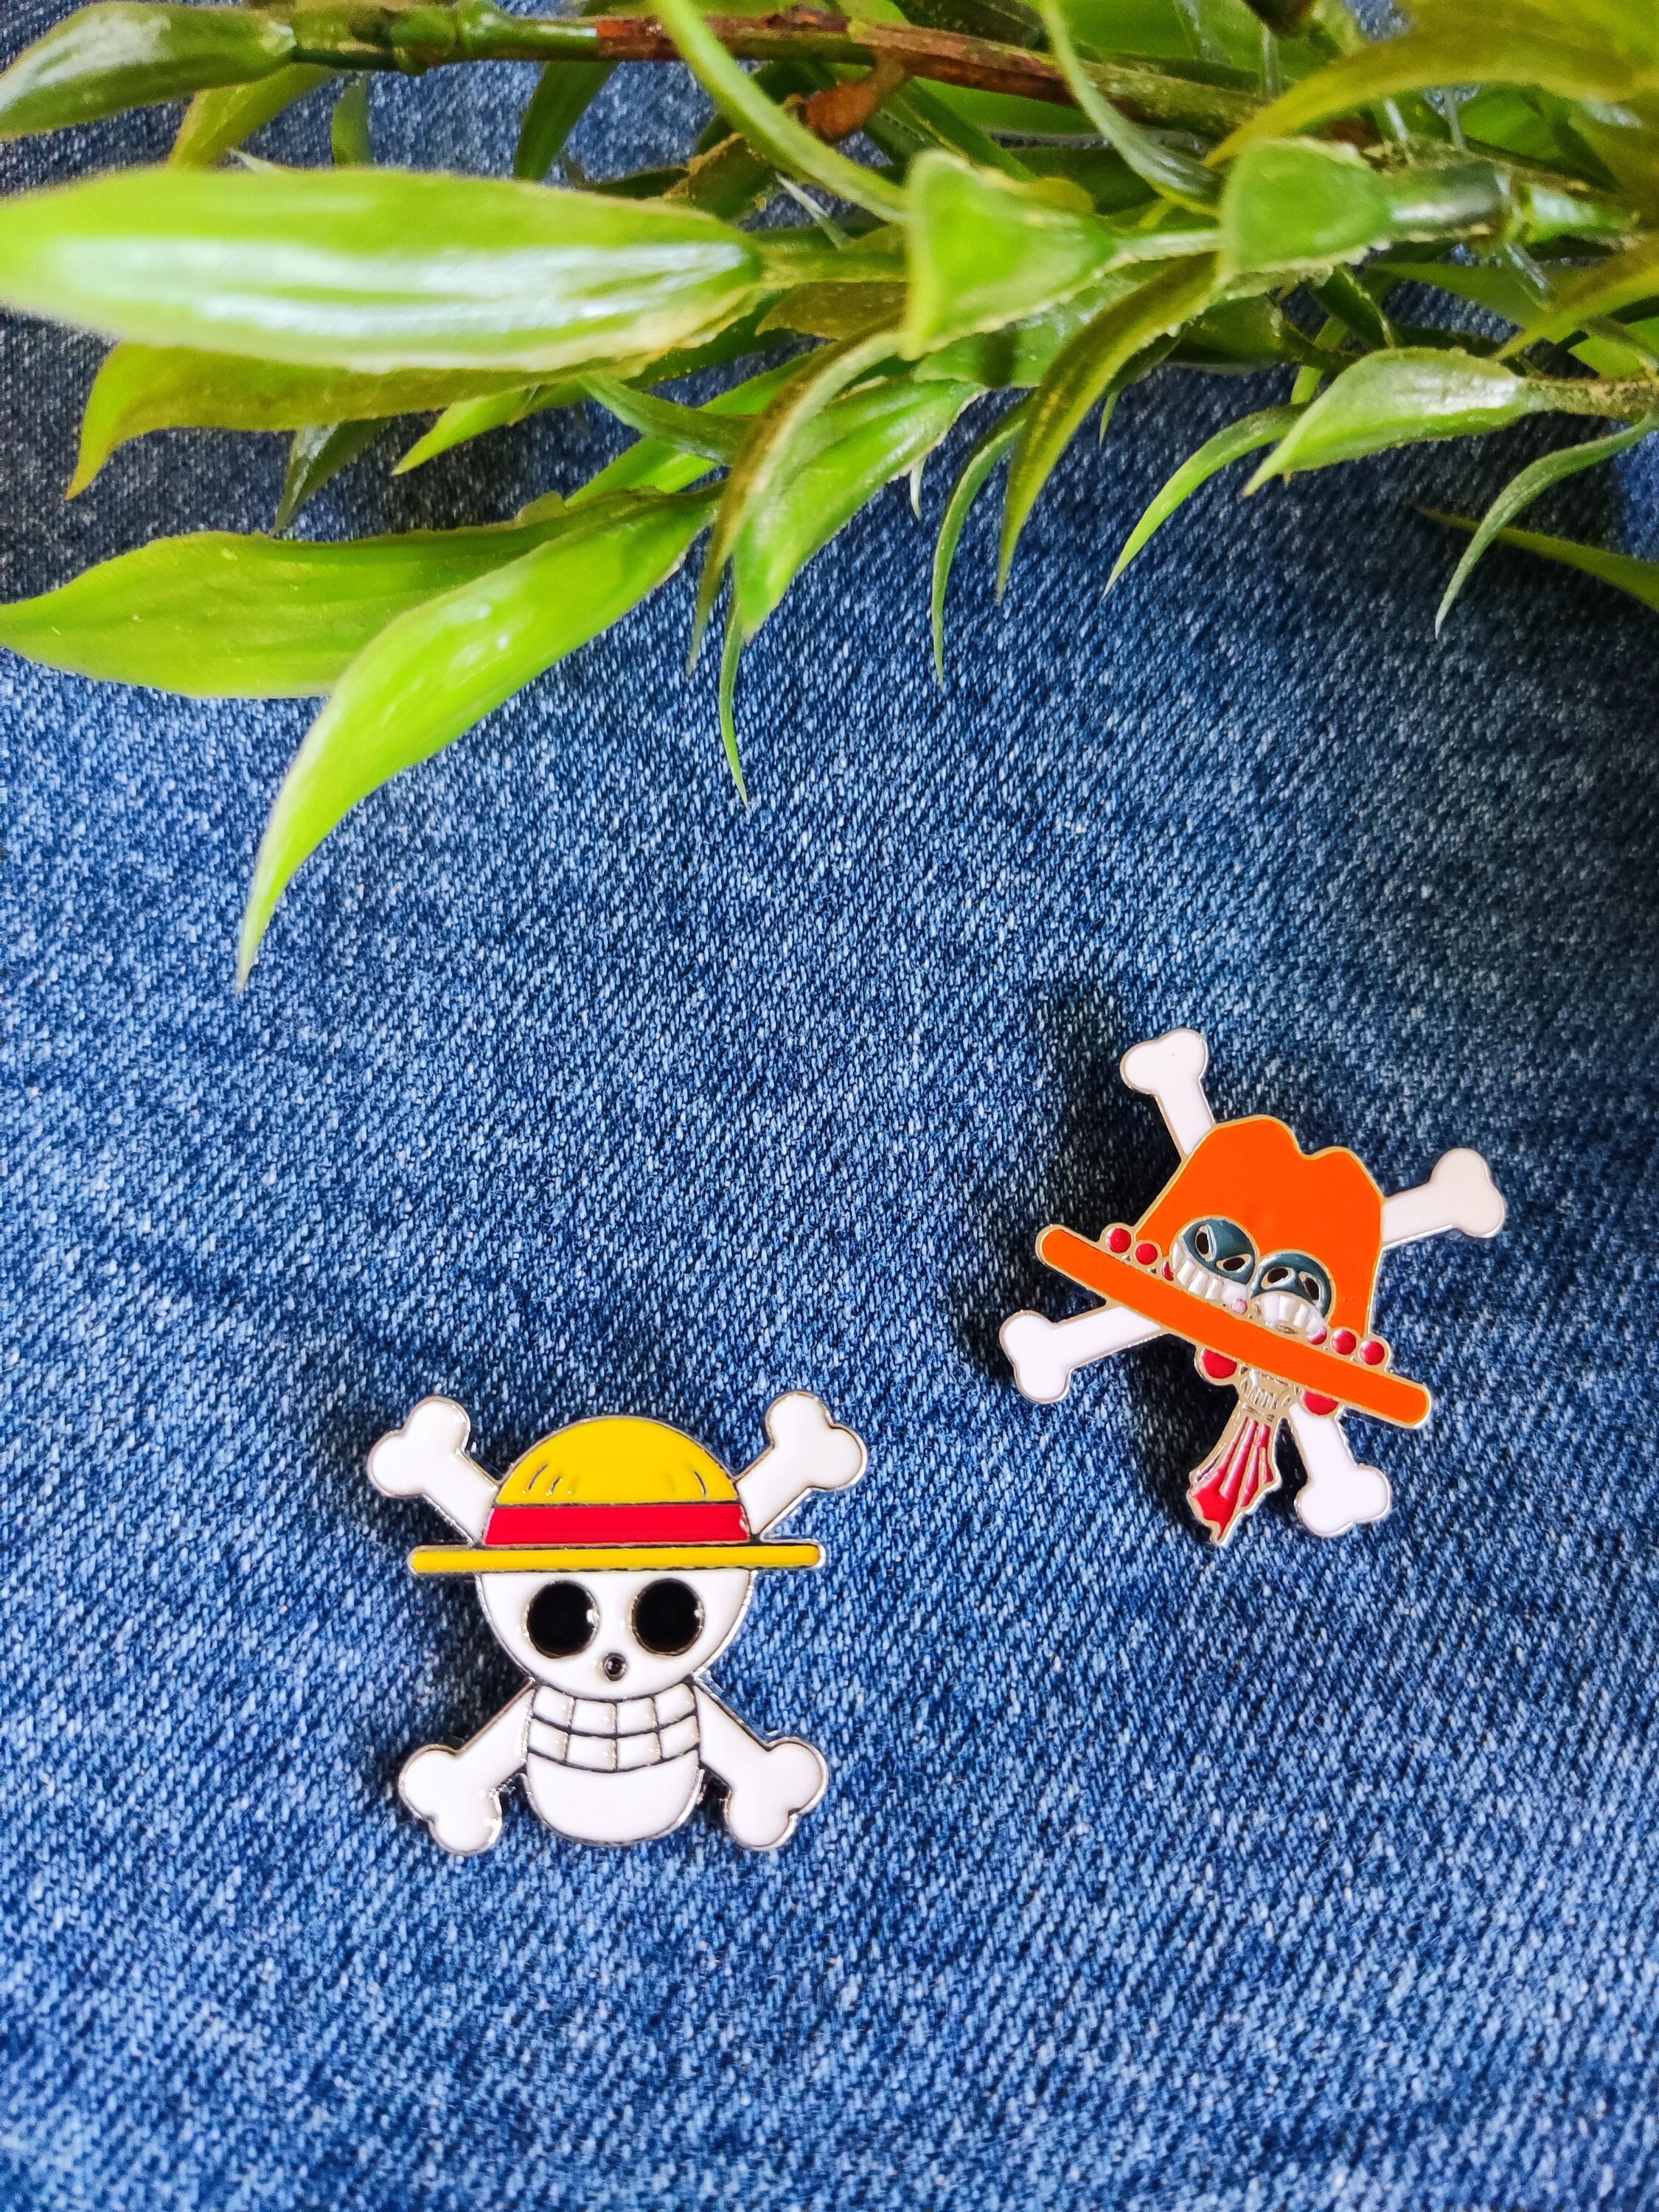 ONE PIECE LUFFY LUCKY CAT Enamel Pin, Cool Anime Pins, Pirate Pin